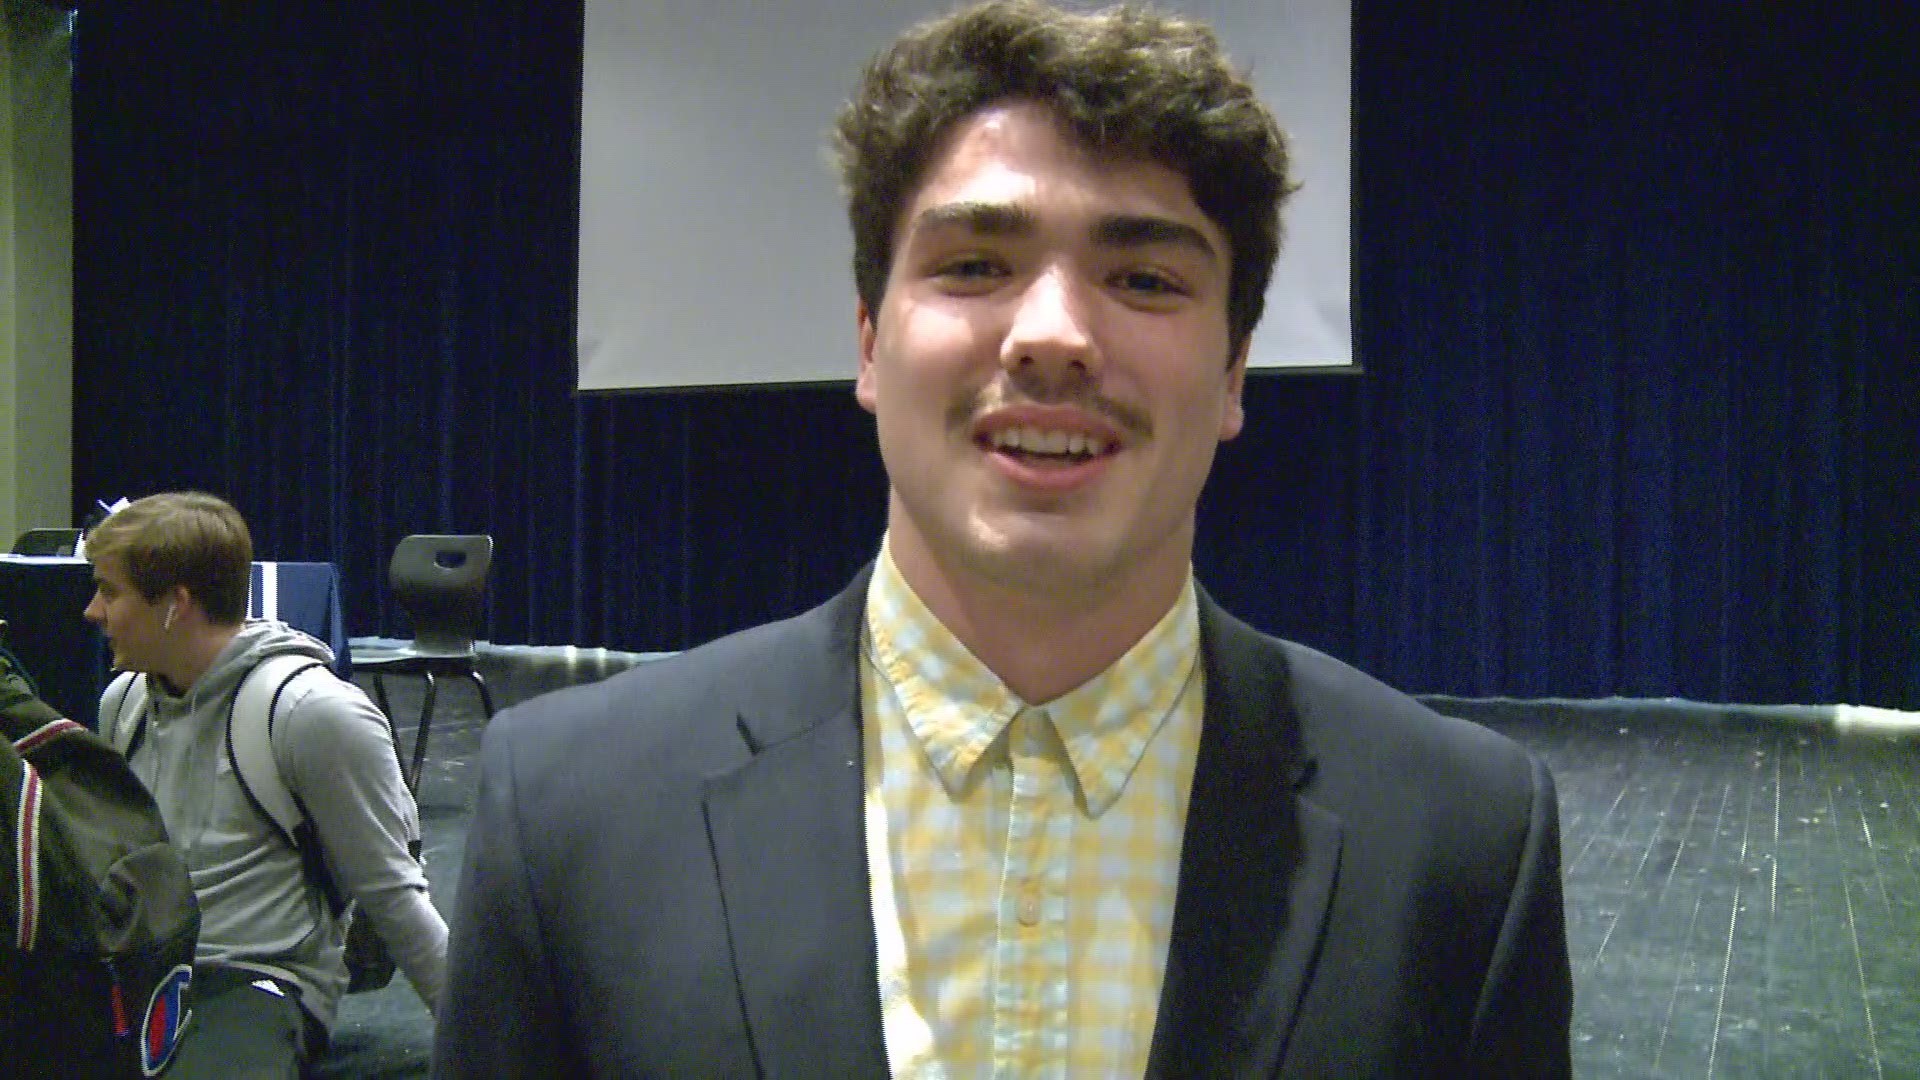 Hardin Valley Academy's Loch Hardin signs to play football with Missouri Southern State University.